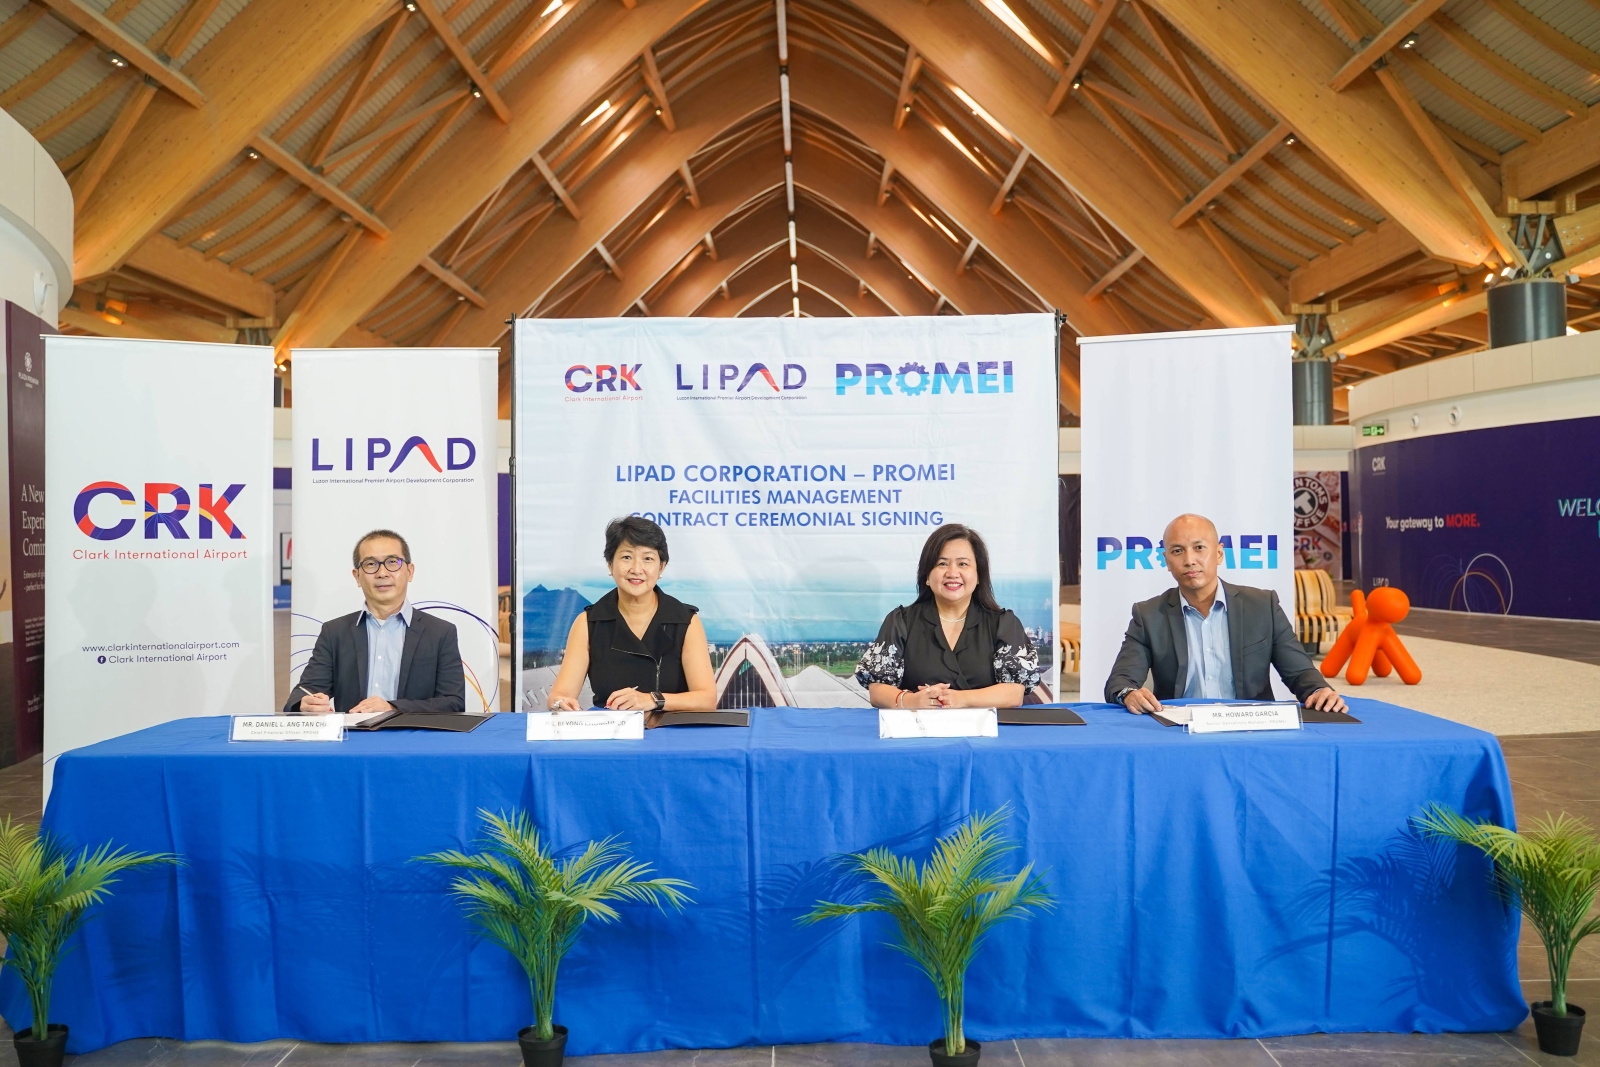 Senior representatives from PROMEI, LIPAD and ENGIE at the ceremonial contract signing. Pictured from left to right: Danny Ang Tan Chai, Director, PROMEI, Bi Yong Chungunco, CEO, LIPAD Corp., Louella Caridad, General Manager, ENGIE Services Philippines, and Howard Garcia, Senior Operations Manager, PROMEI